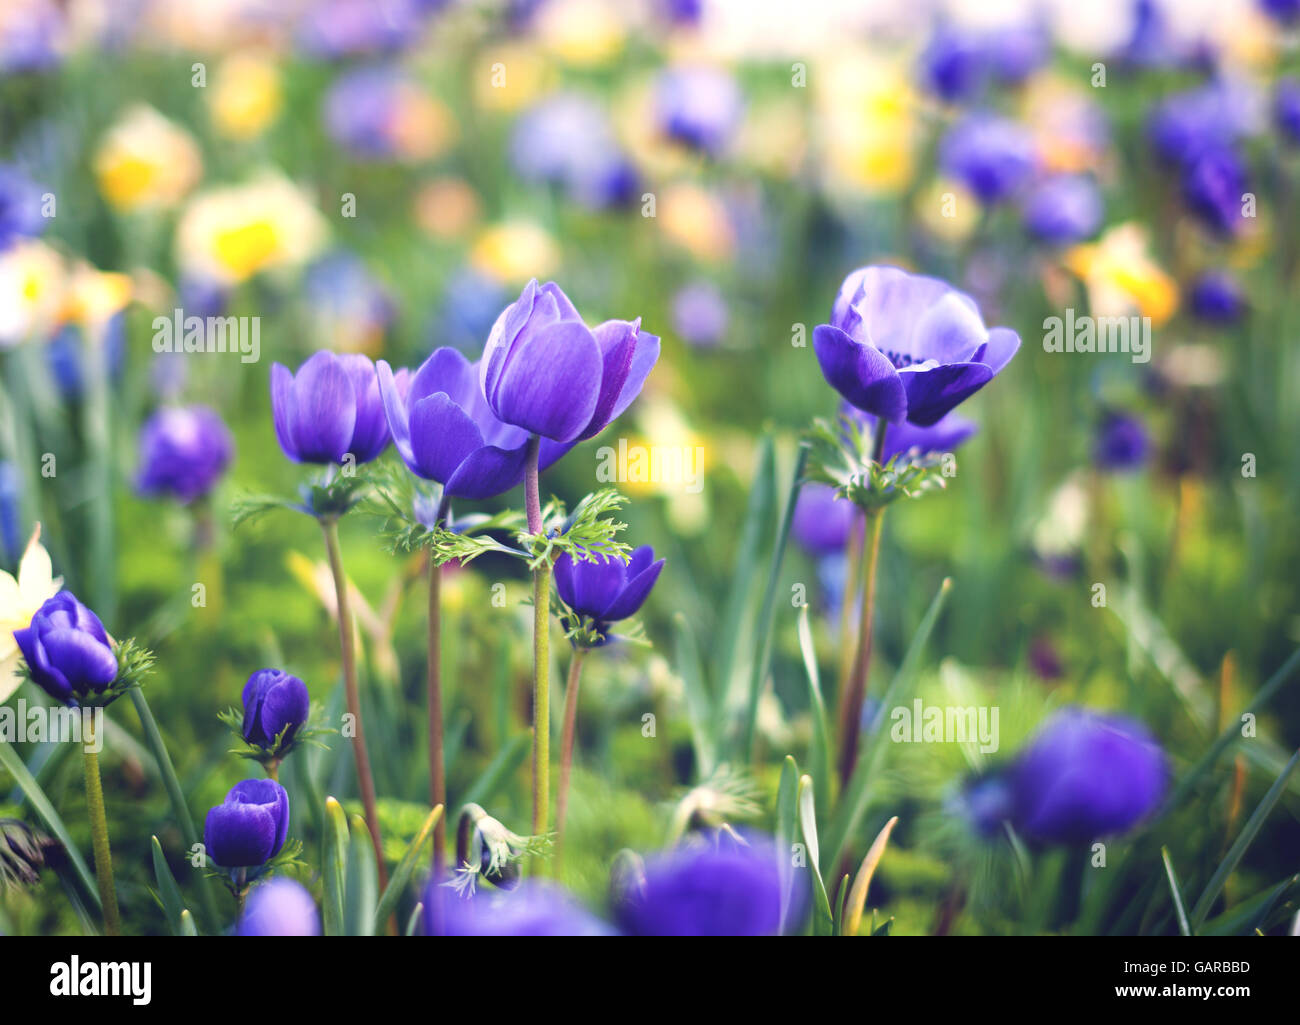 Purple flowers. Beautiful flowers in spring garden, vibrant floral background. Stock Photo